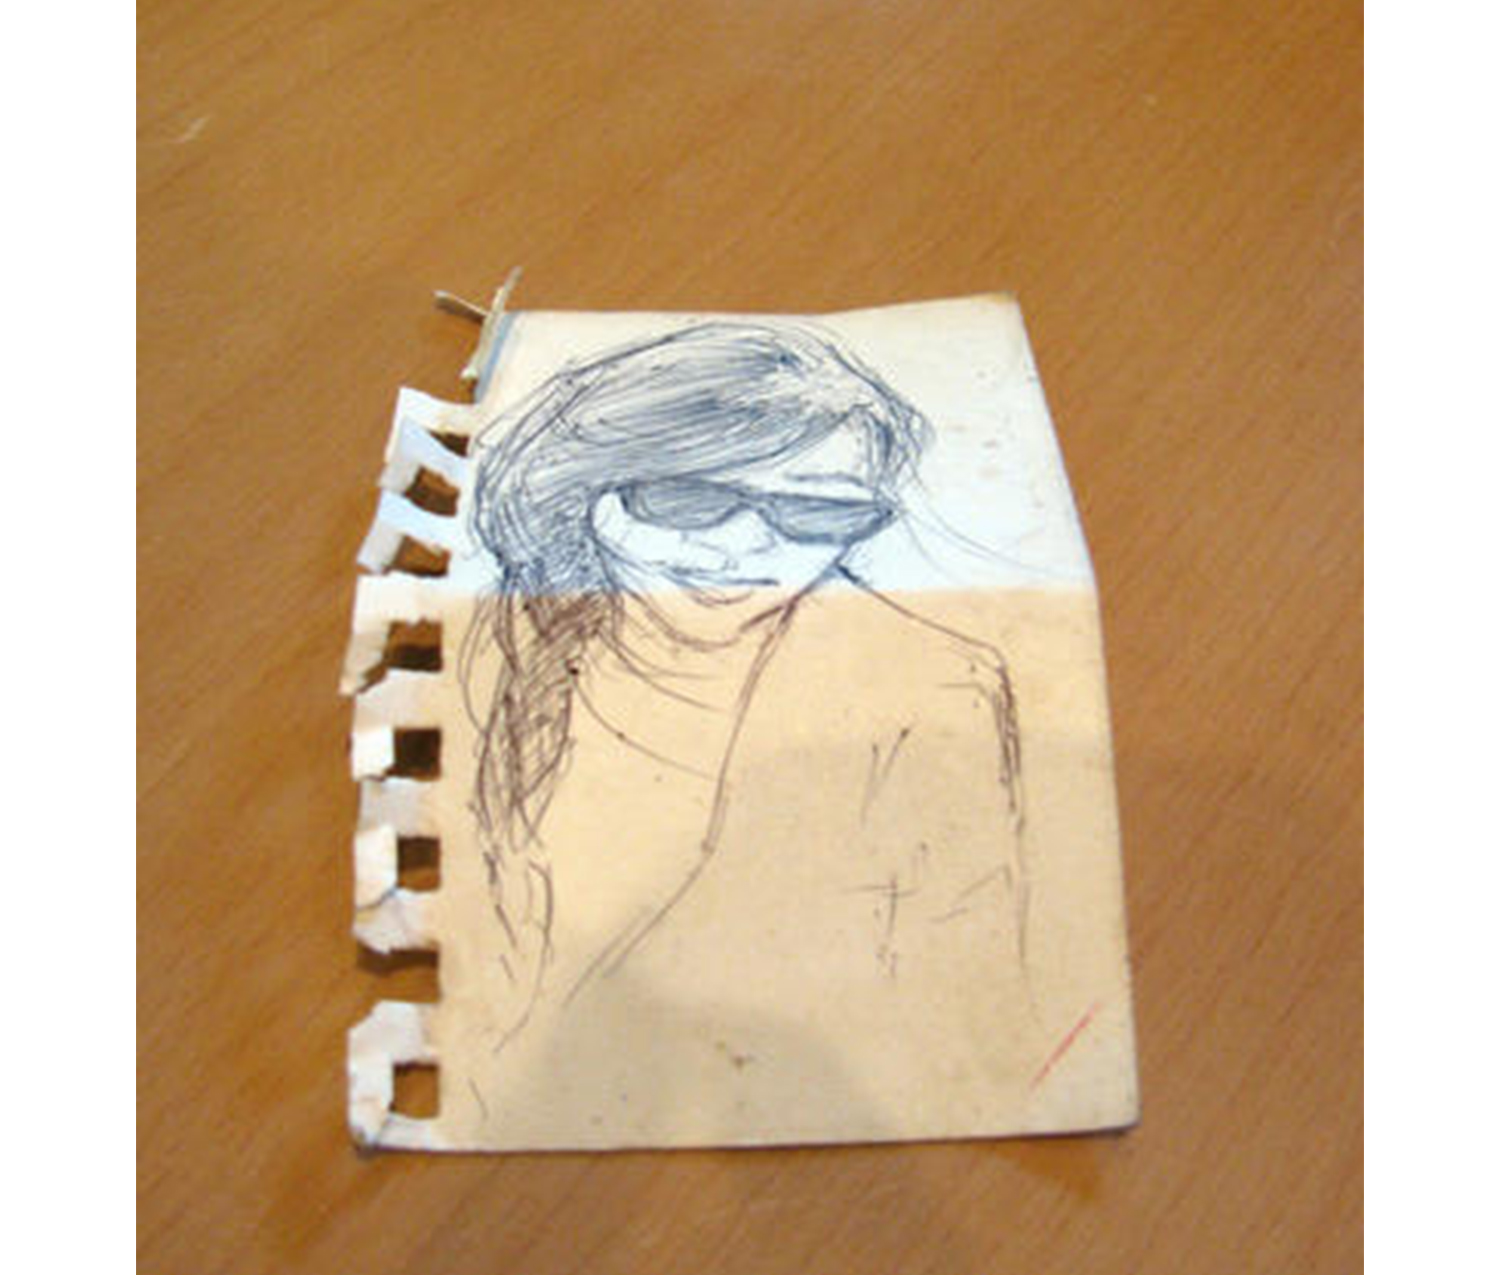 white slip of paper with a sketch of a girl wearing hair in a braid and sunglasses